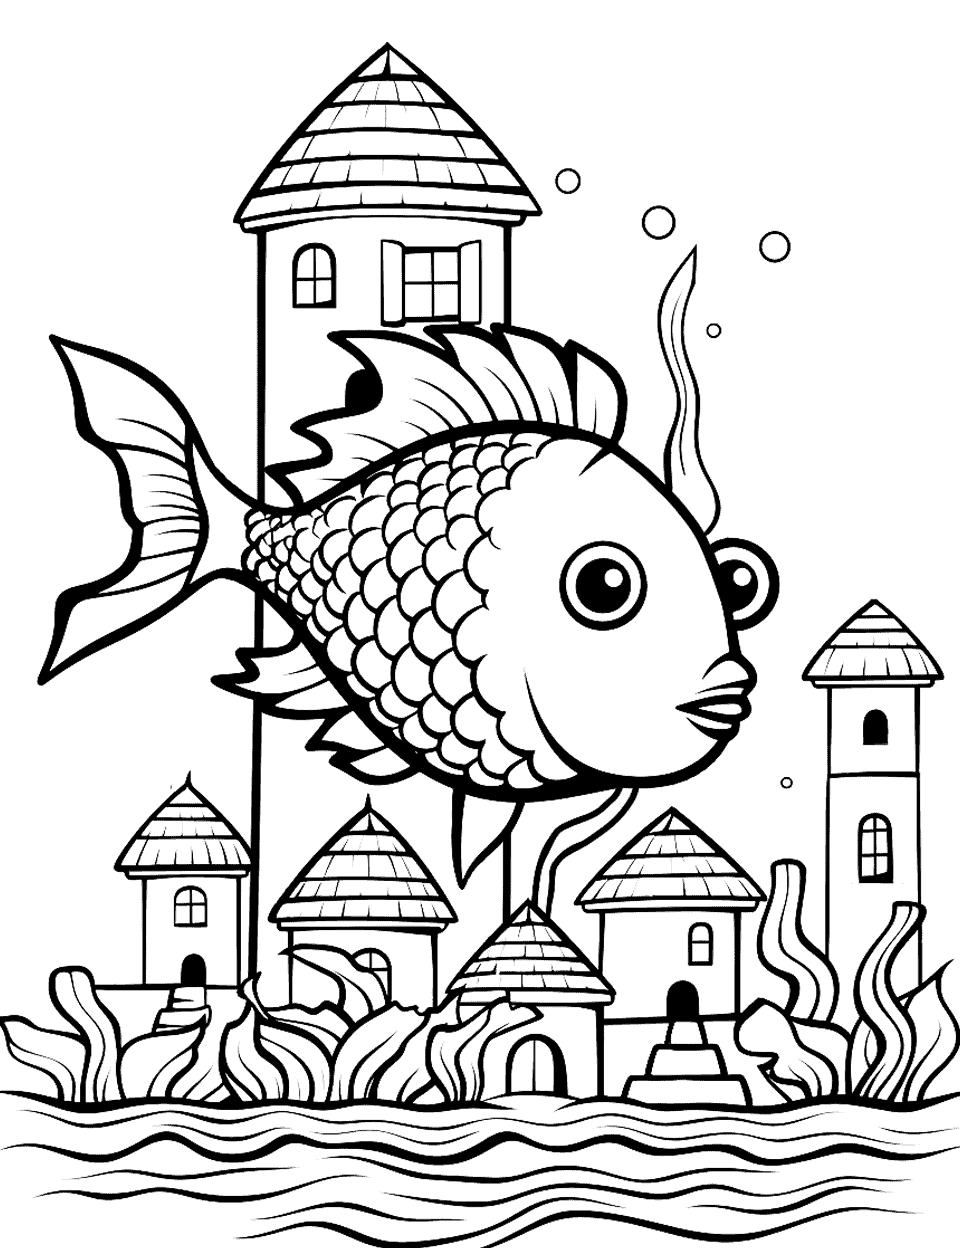 Fish Village Coloring Page - A small village underwater, with fish.